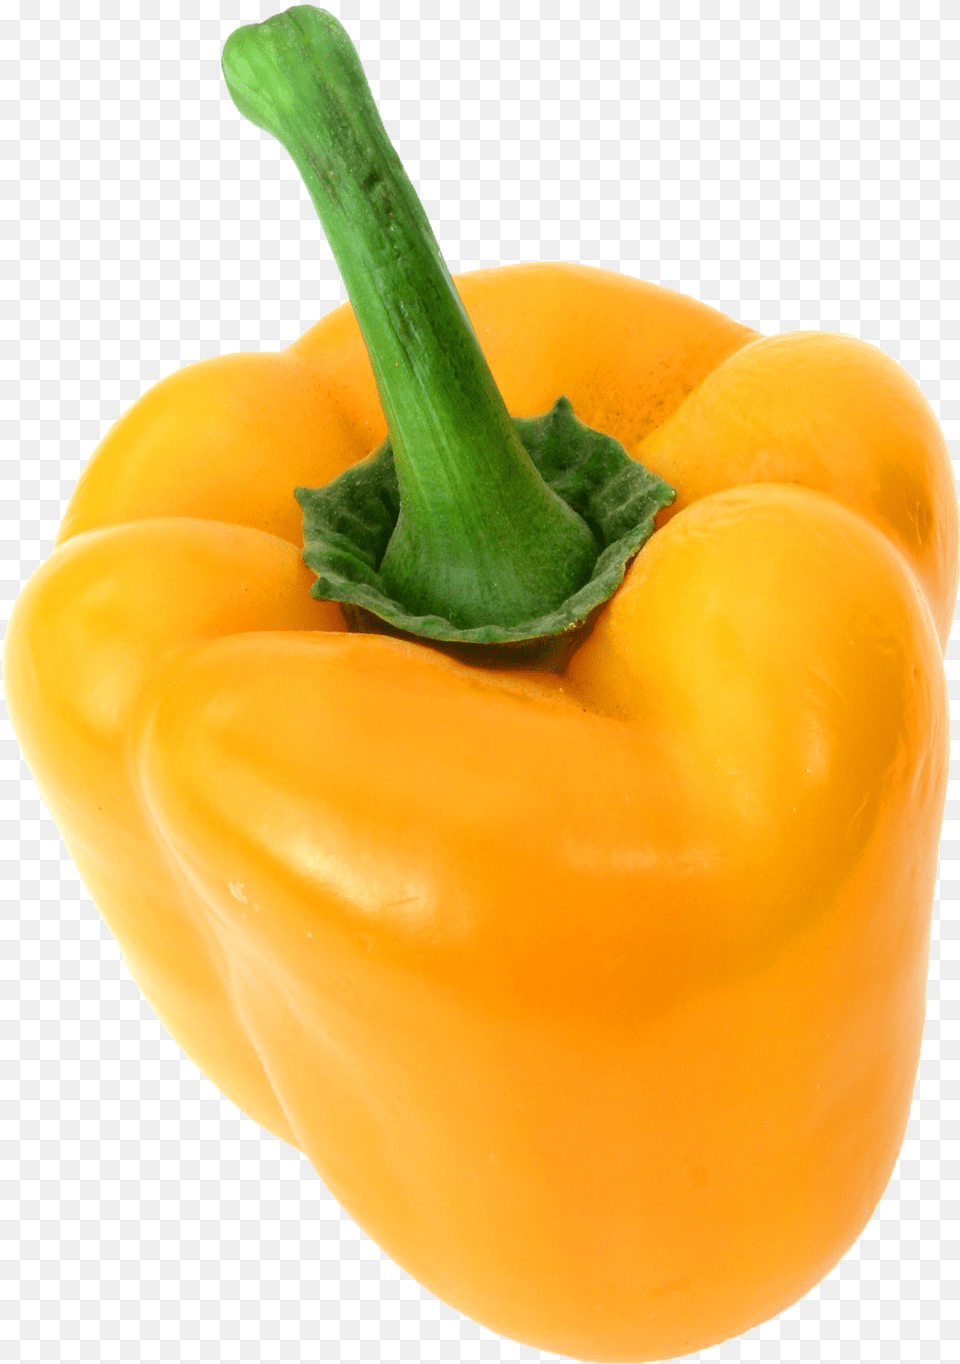 Bell Pepper Royalty Image Diabetes Mellitus, Bell Pepper, Food, Plant, Produce Png